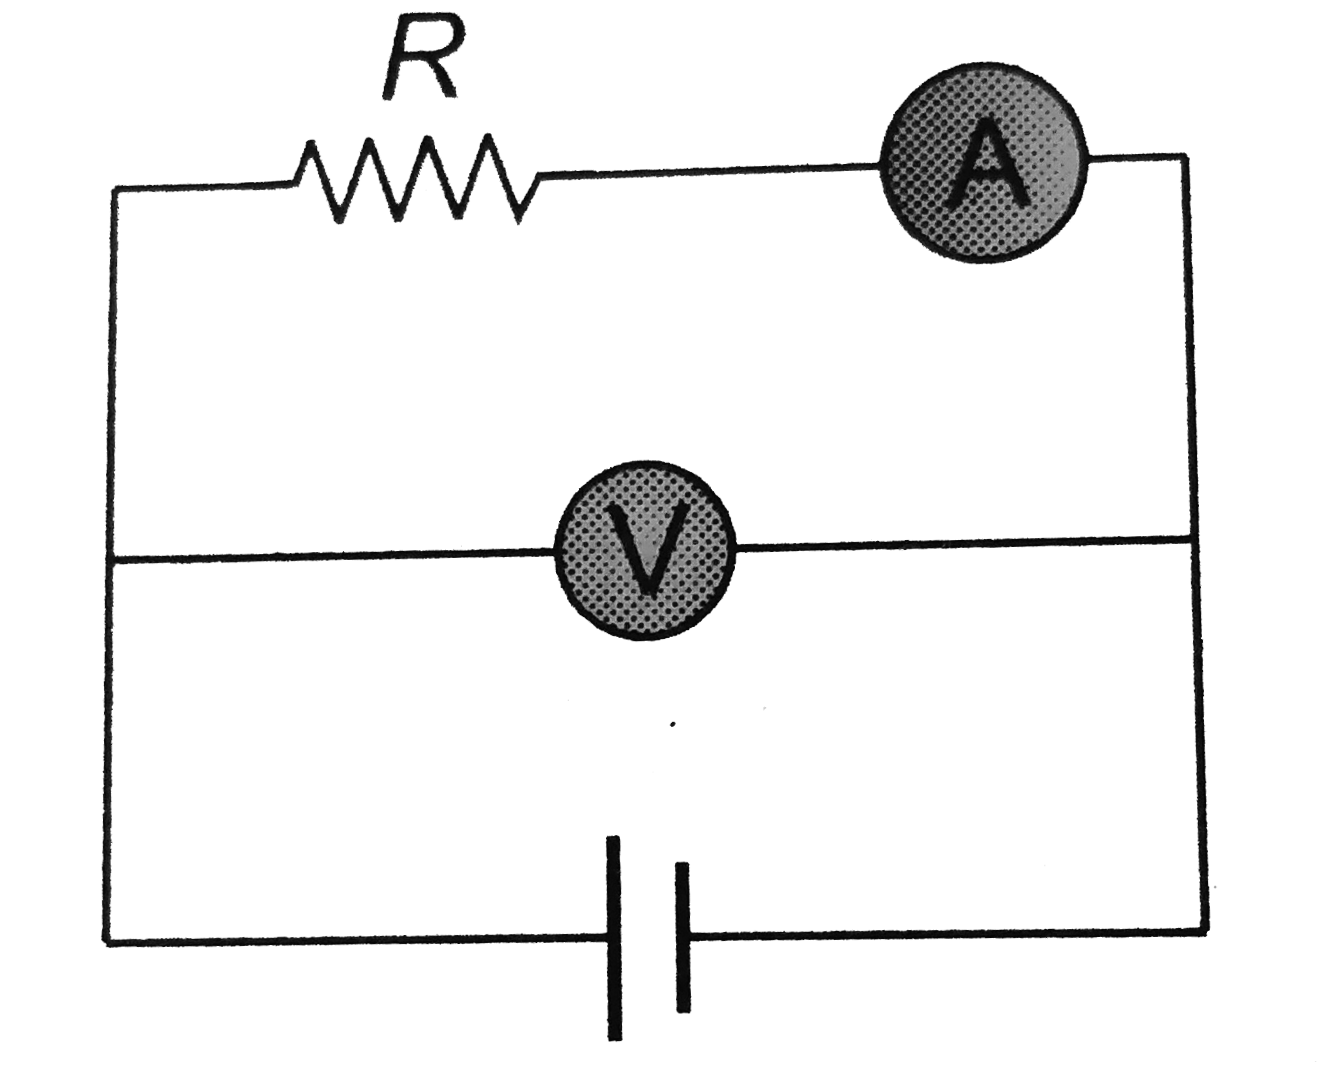 In the given circuit, the ratio of voltmeter reading to the ammeter reading is R'. If resistance of ammeter is RA and that of voltmeter RV, then